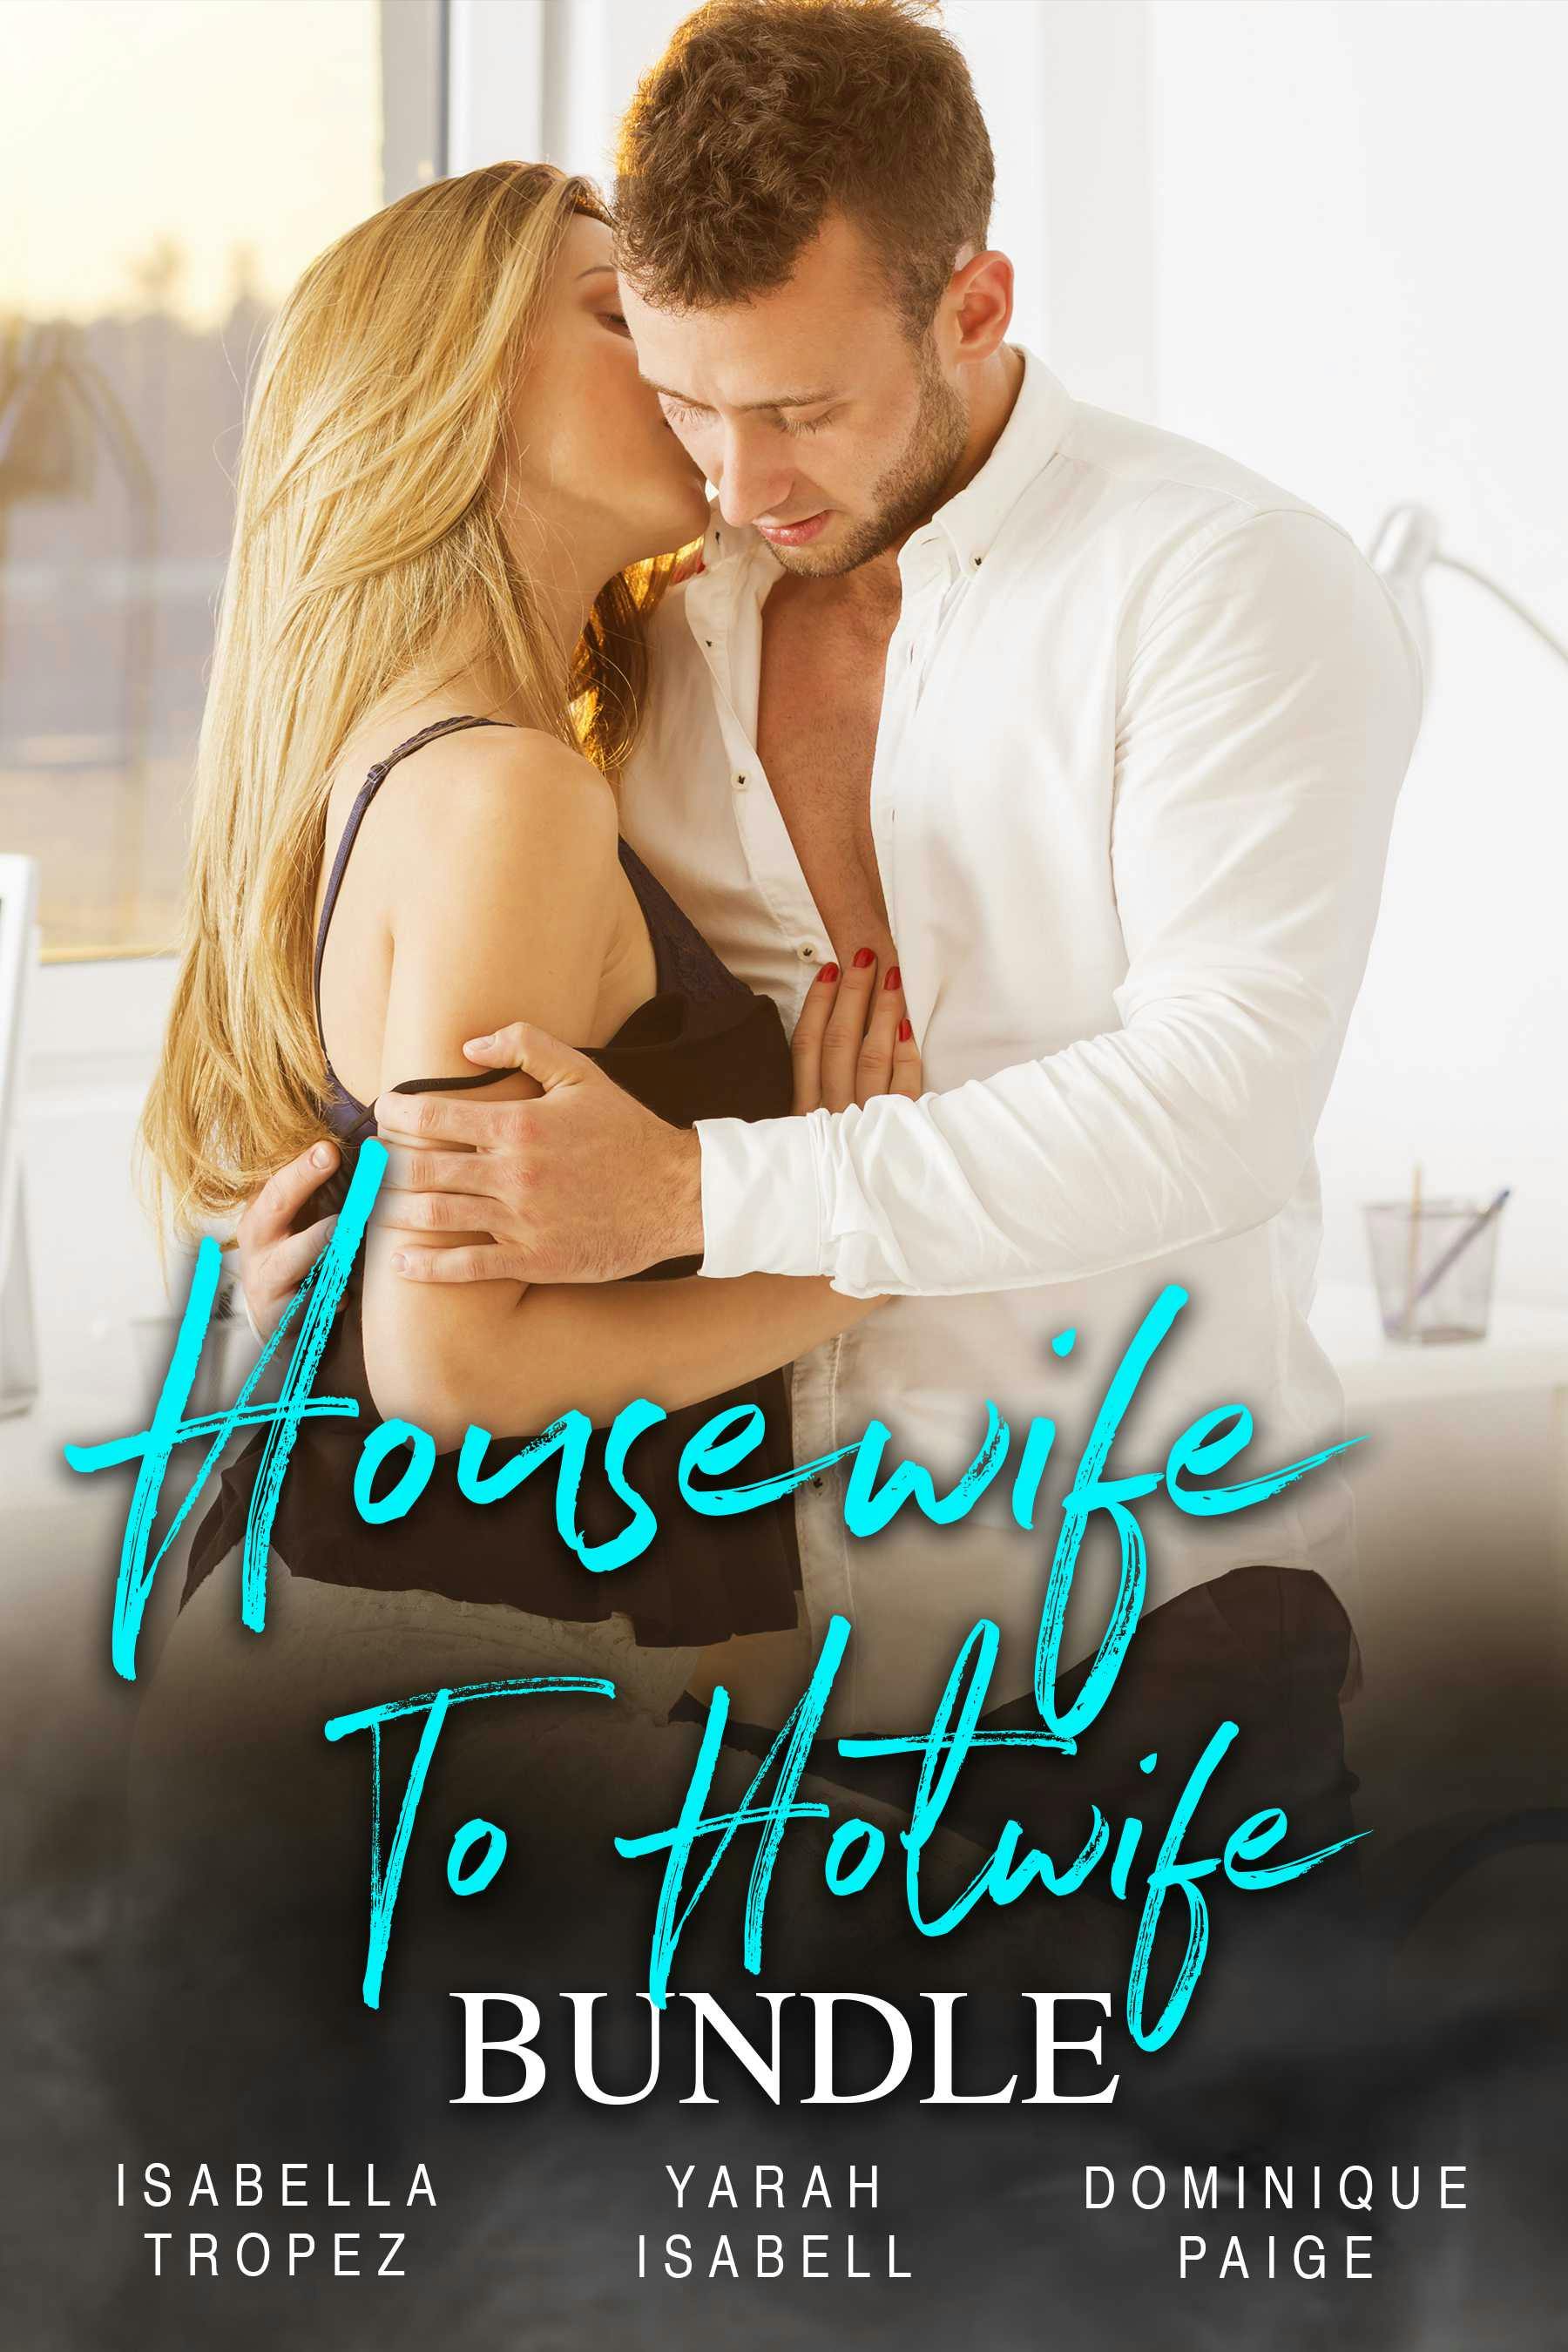 Housewife To Hotwife Bundle - undefined